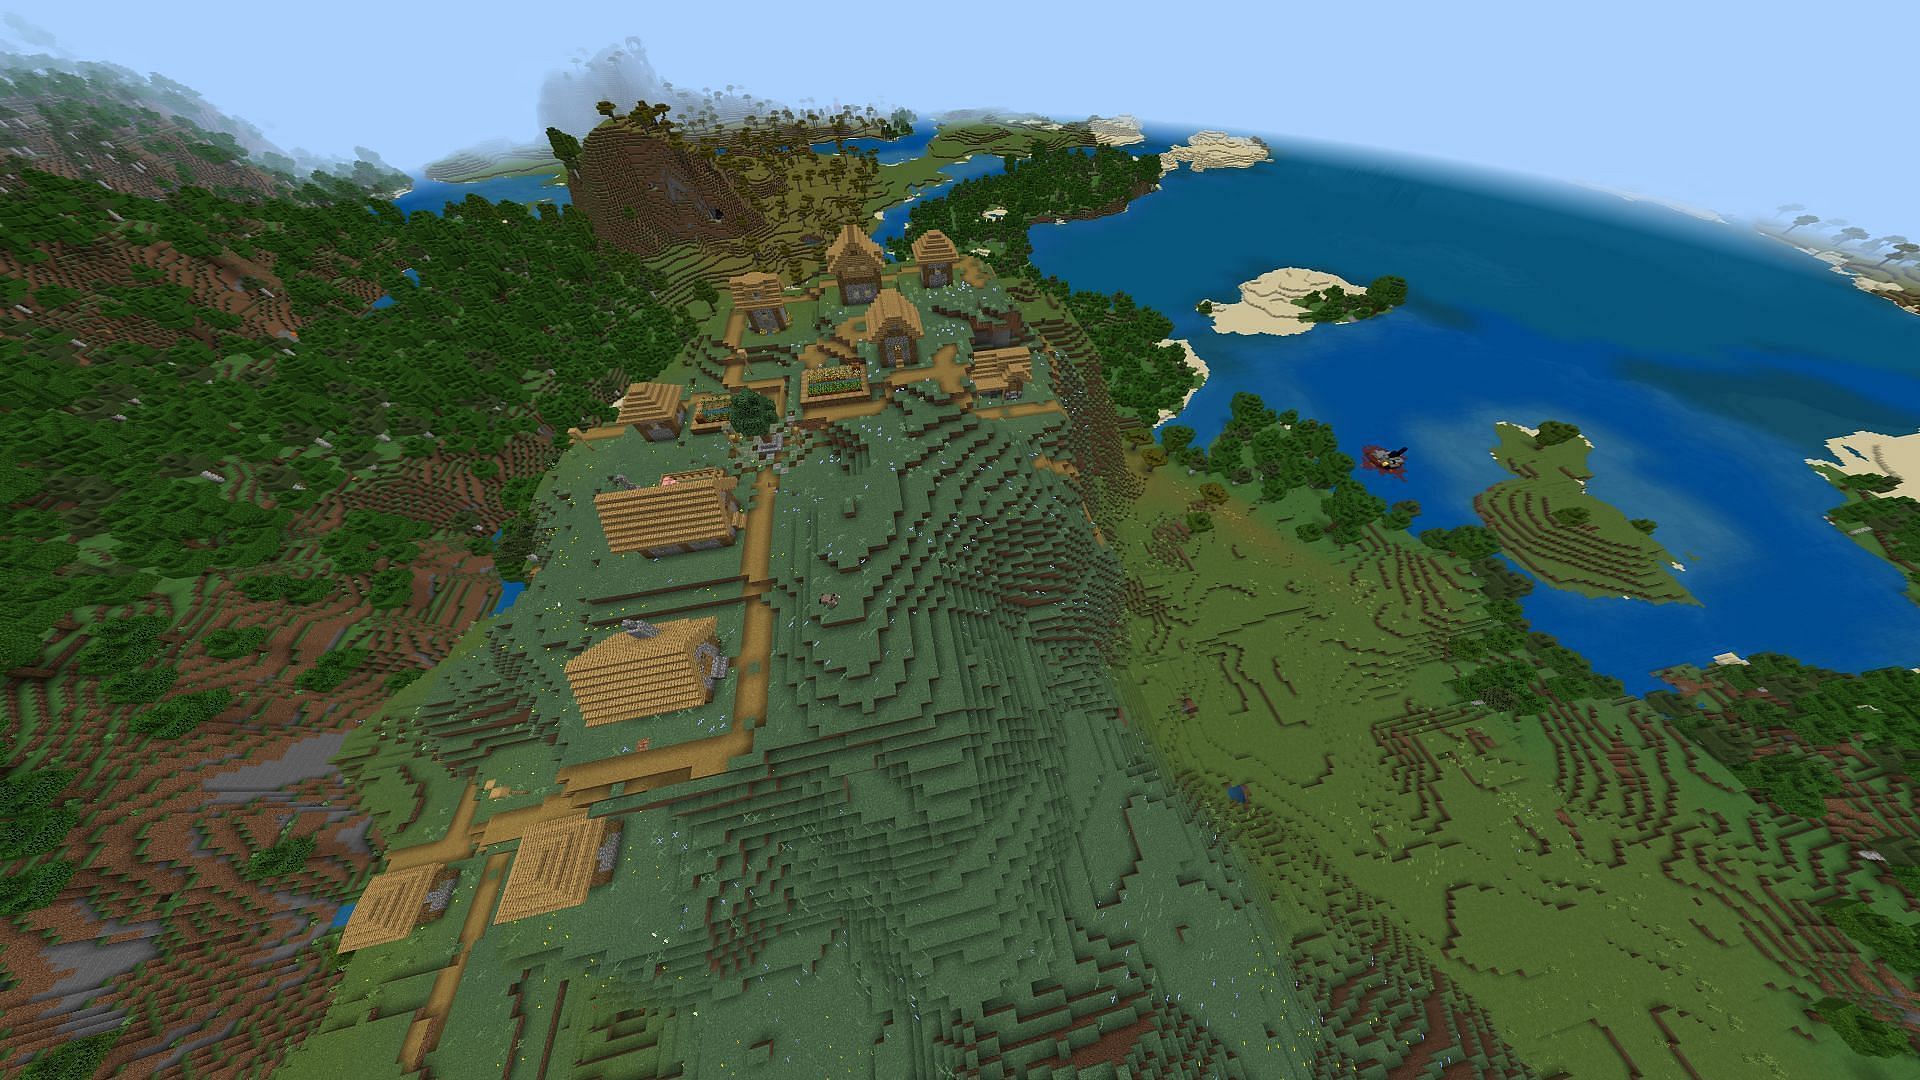 Villages abound along with other lootable structures in this Minecraft Bedrock seed (Image via Mojang Studios)